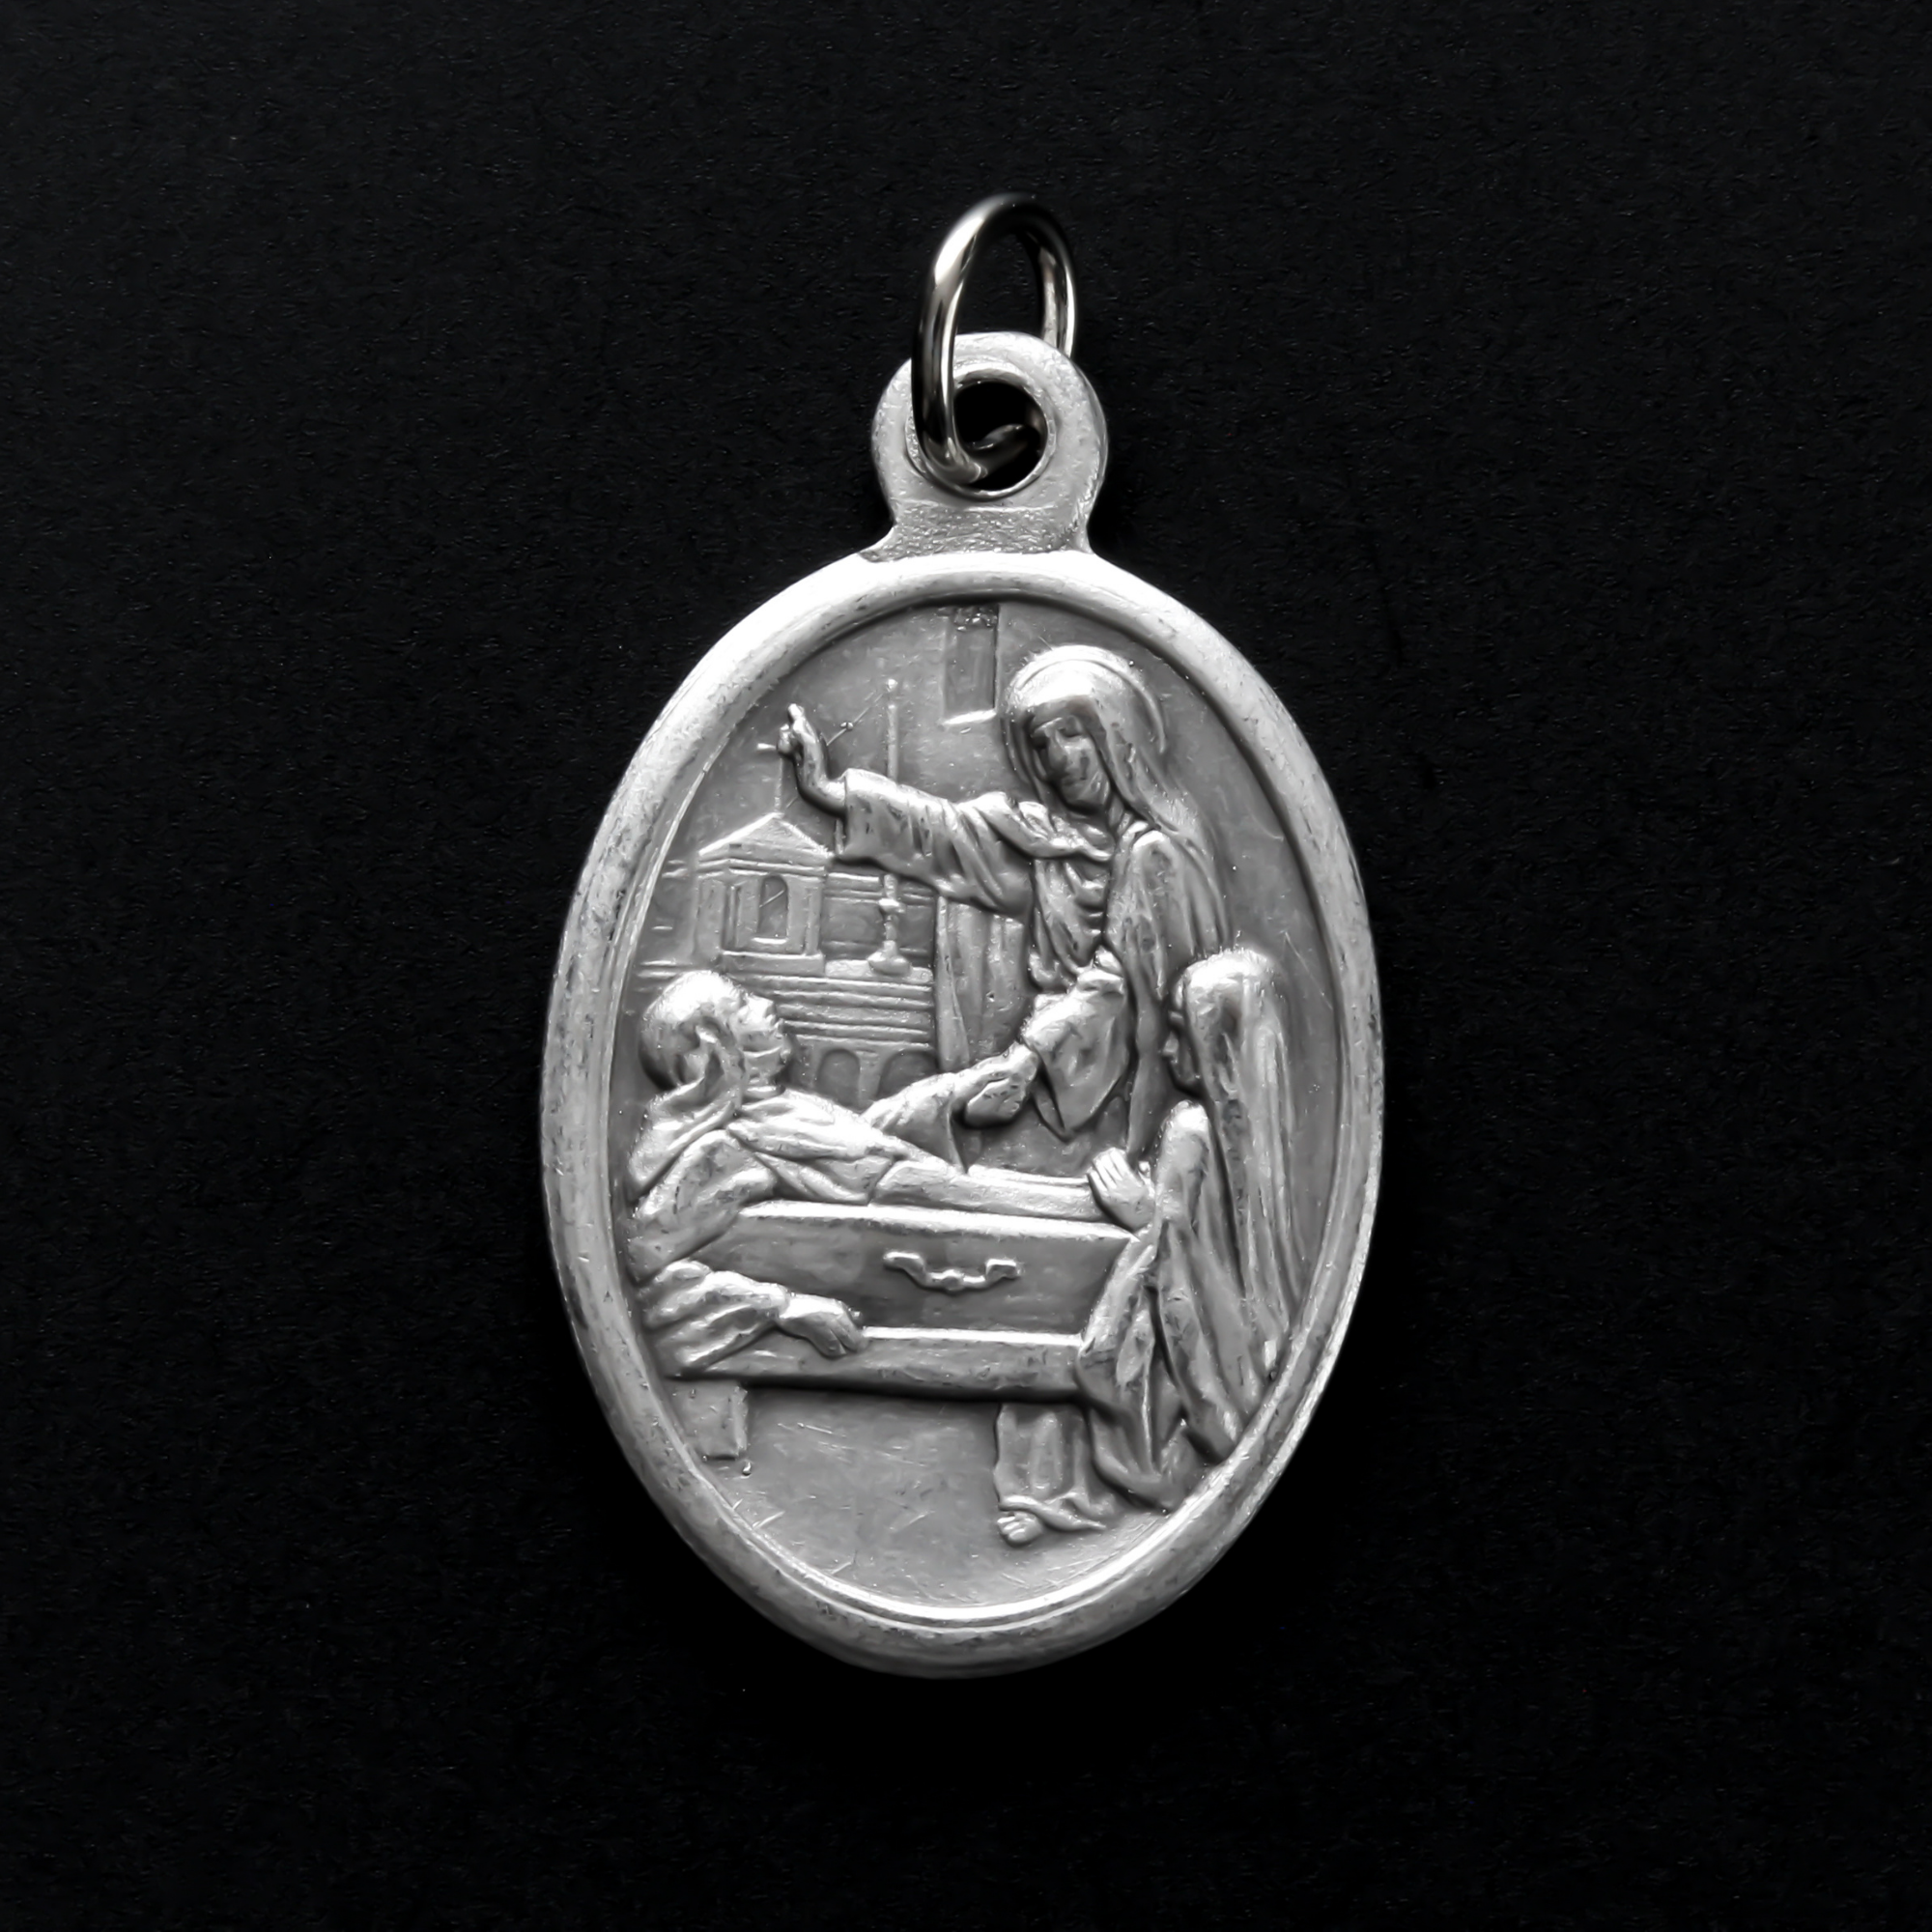 Saint Colette of Corbie medal, made in Italy